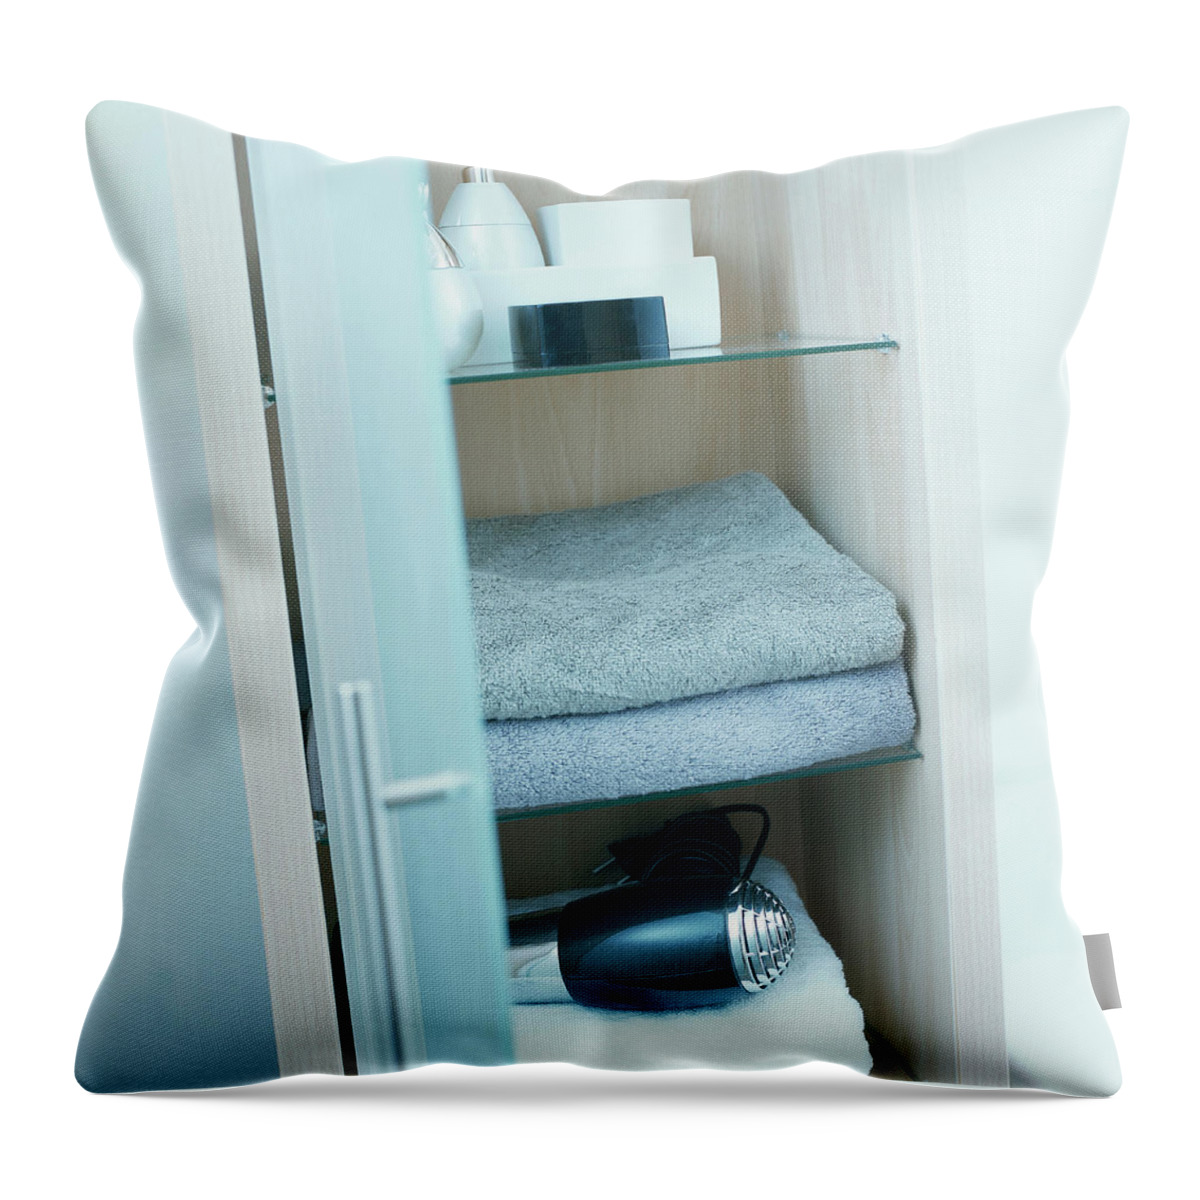 Ip_00340356 Throw Pillow featuring the photograph Towels And Hair Drier On Shelves In A Cupboard by Luc Wauman